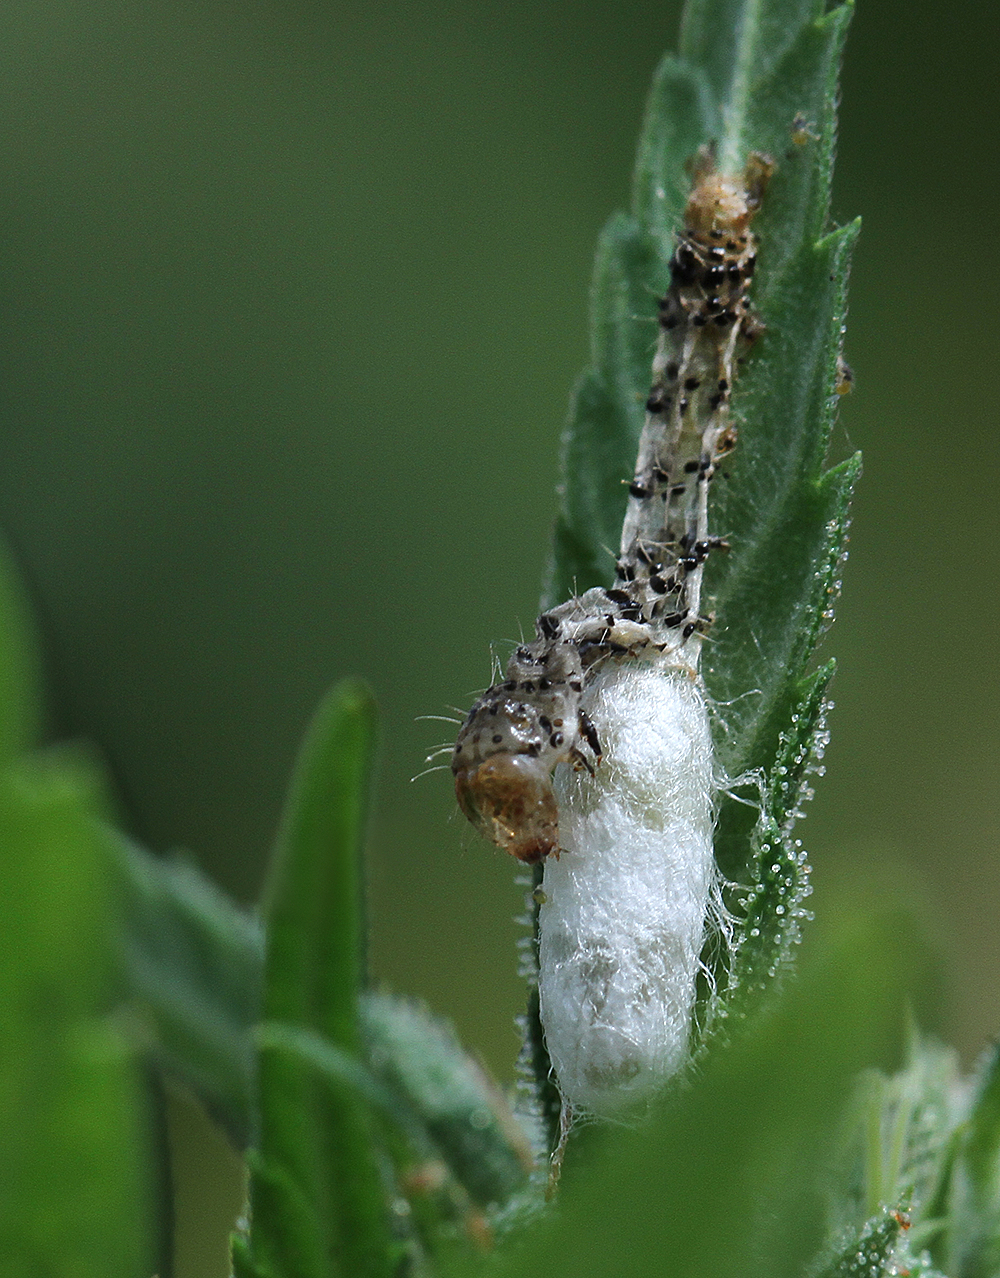 parasitic wasp pupa next to a dead caterpillar that was eaten by the wasp larva.